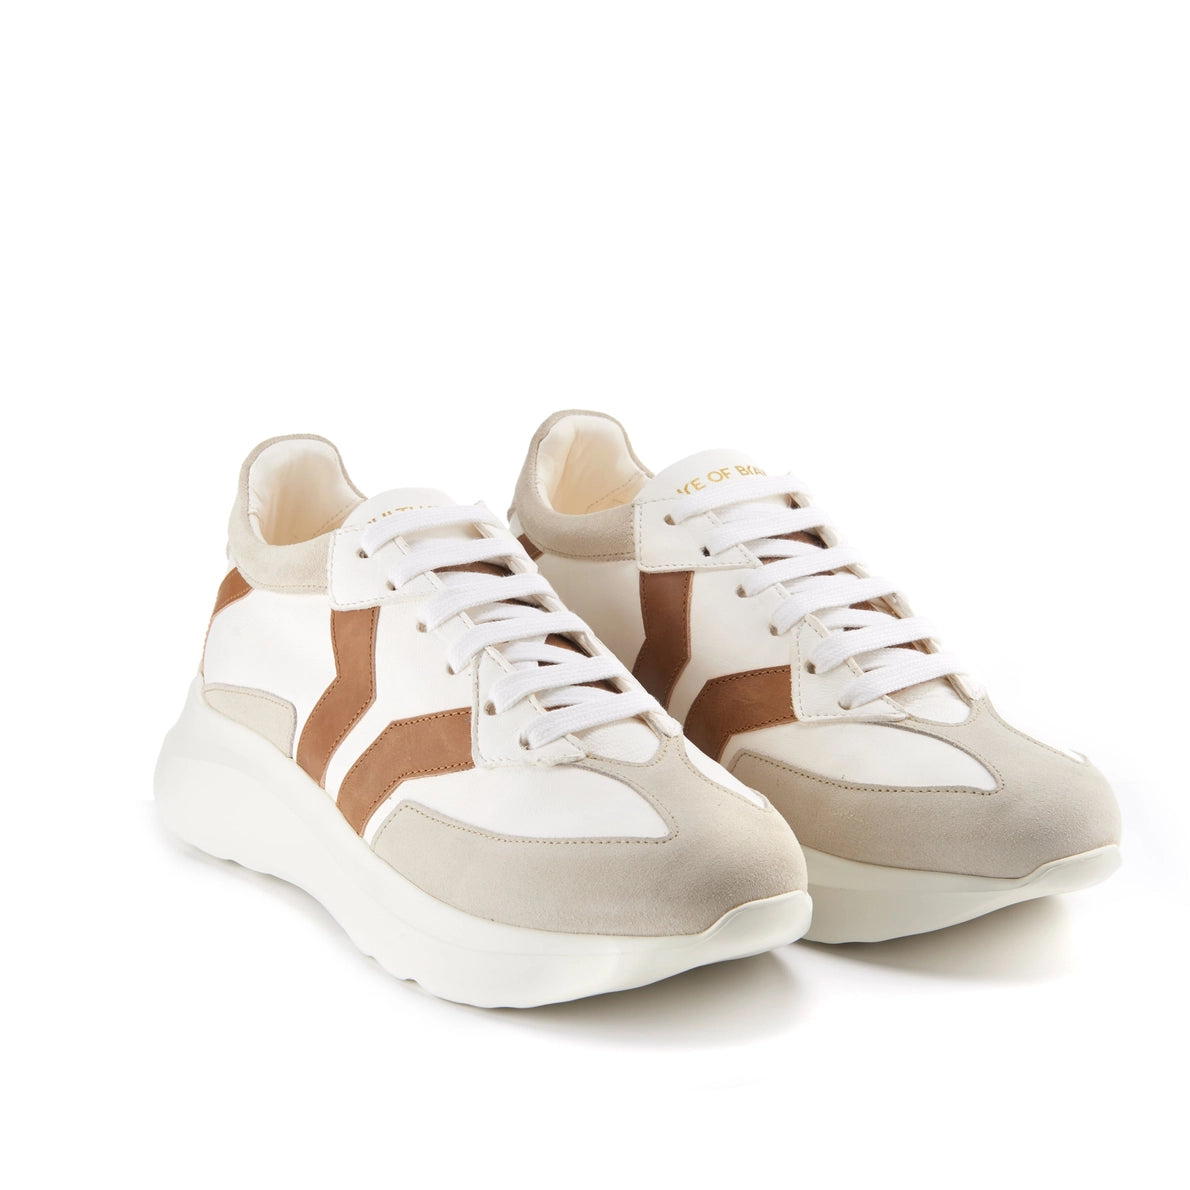 Free Soul 4 Women's White Low Cut Leather Sneakers | Handmade in Italy C.O.B. by Culture of Brave